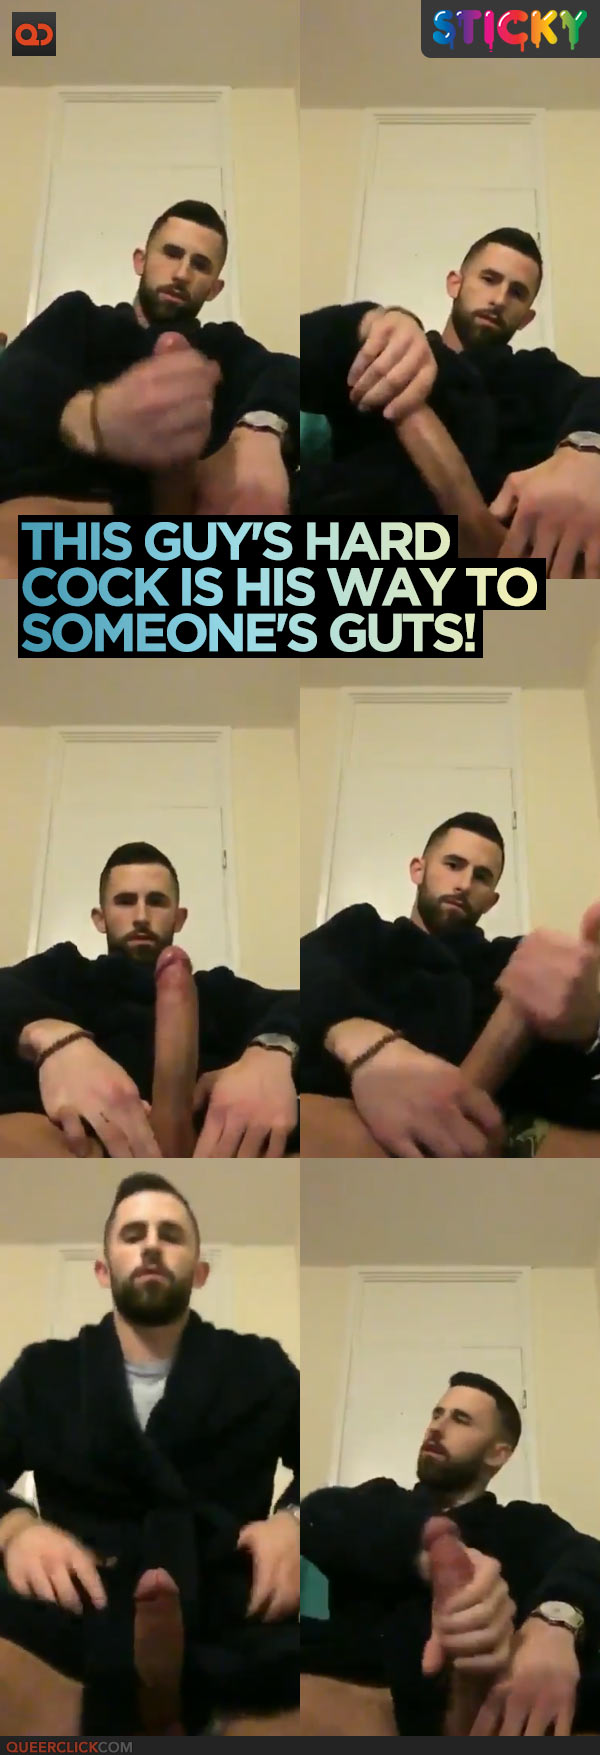 This Guy's Hard Cock Is His Way To Someone's Guts!